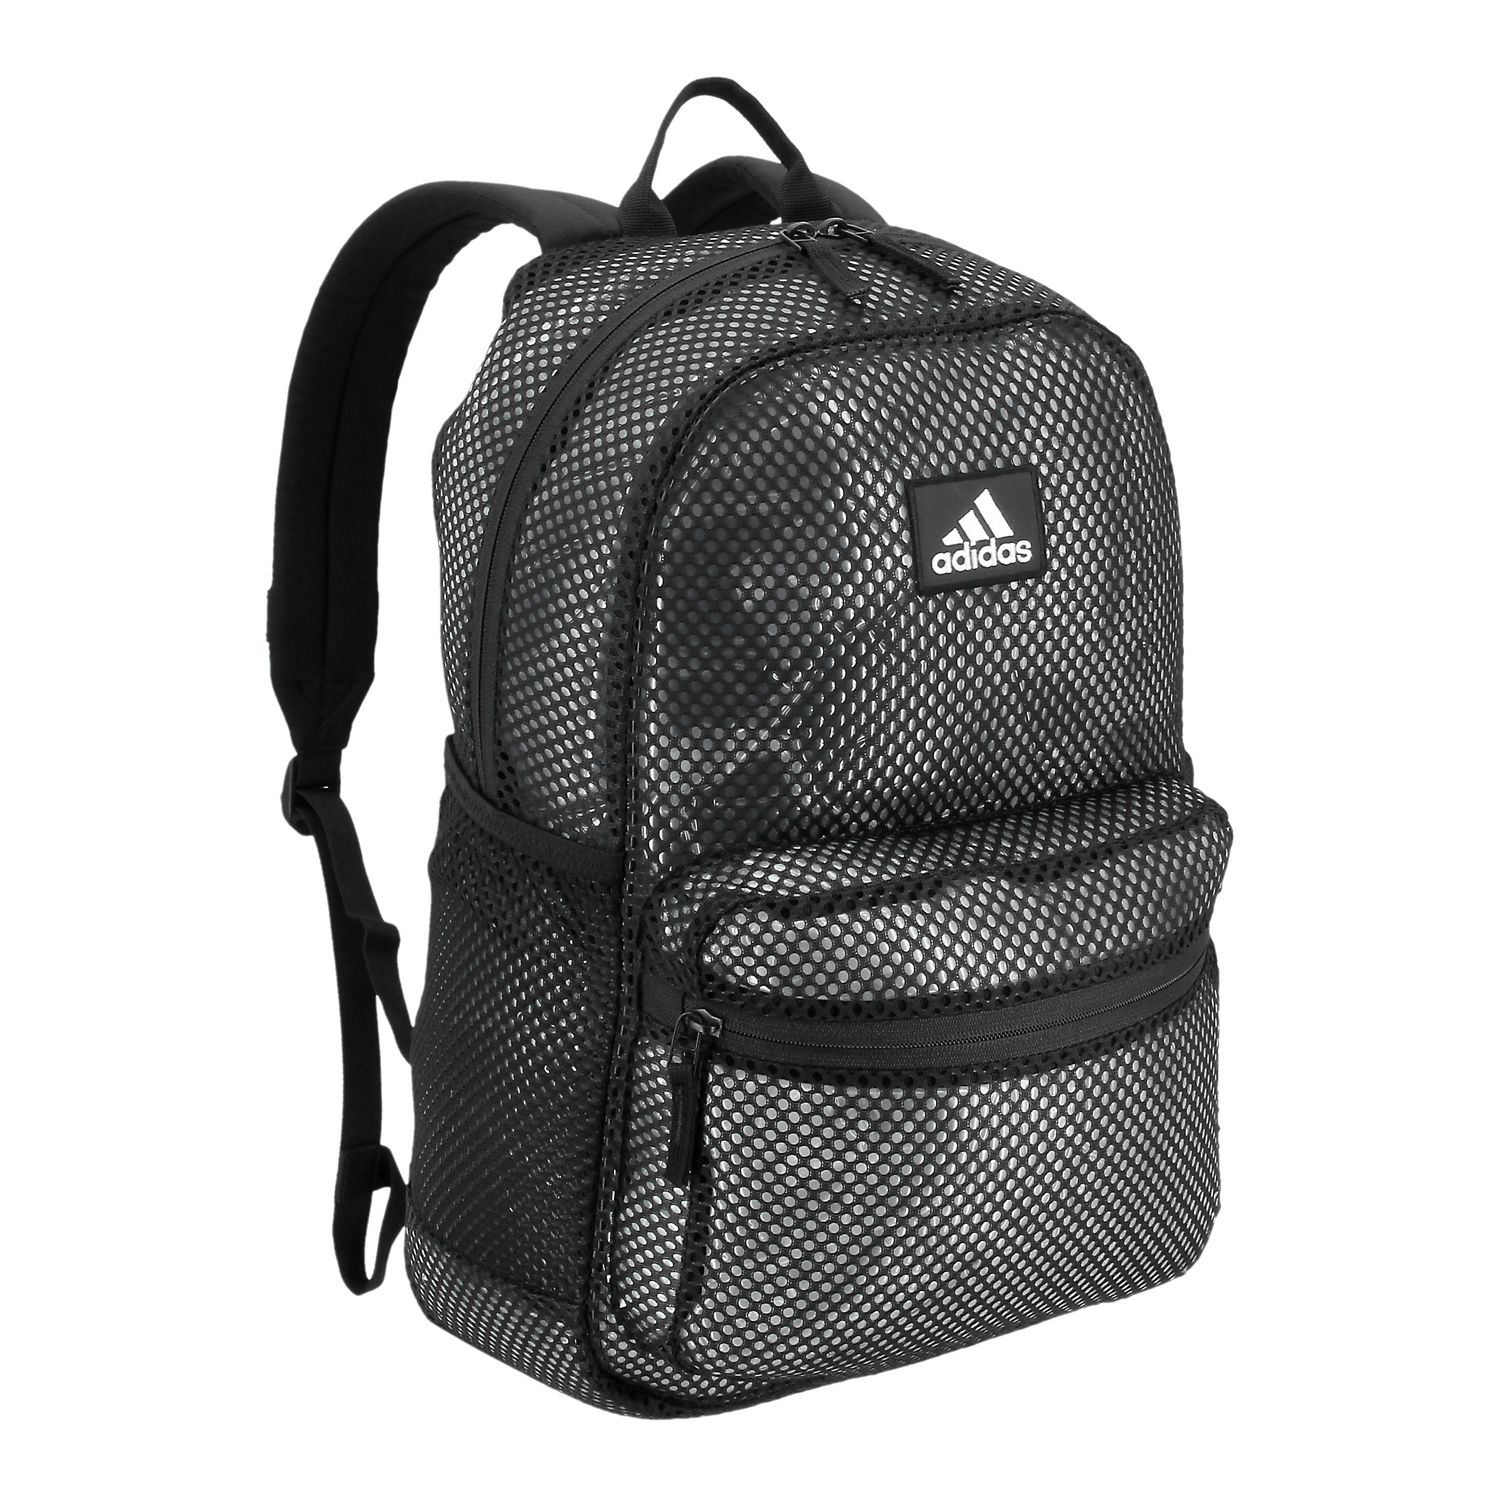 where are adidas bags made